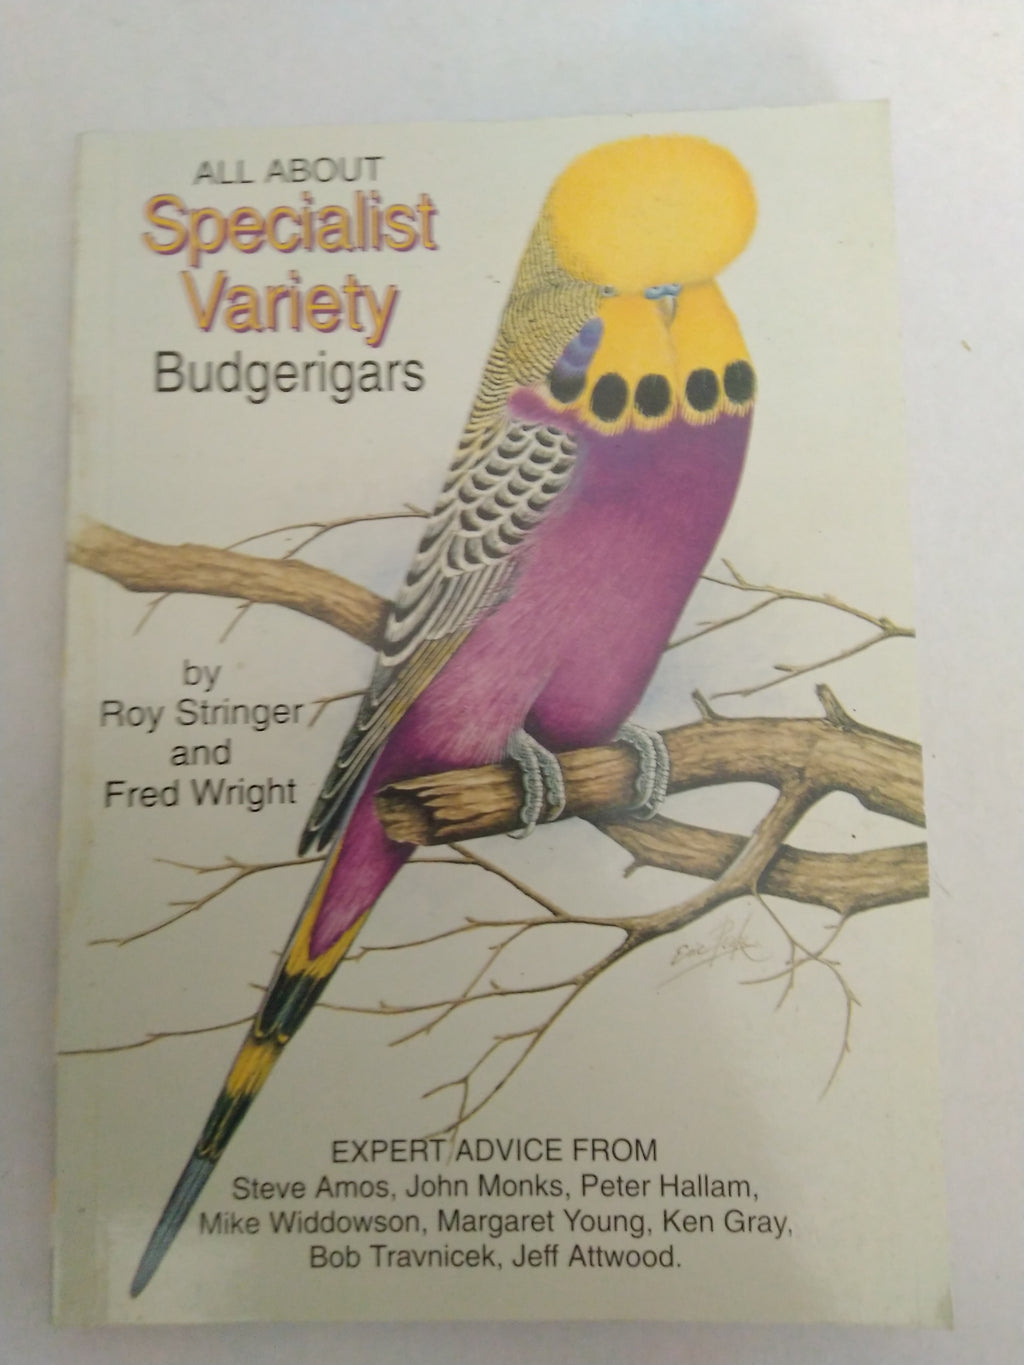 All About Specialist Variety Budgerigars by Fred Wright and Roy Stringer (New)